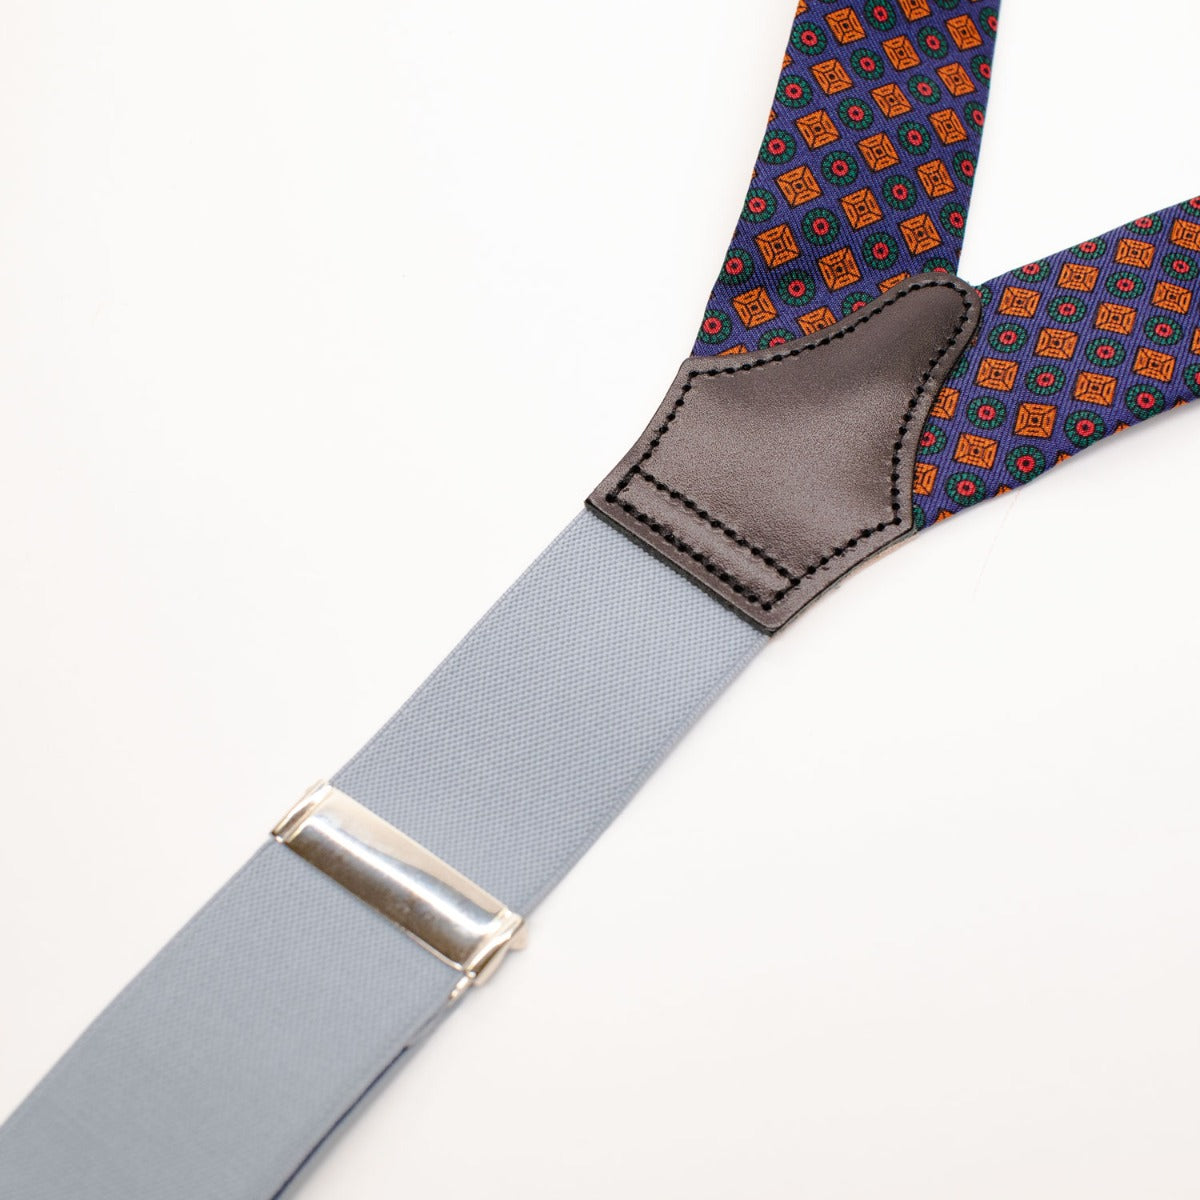 Adjustable leather Sovereign Grade Solid Claret Braces with a blue and orange pattern, available at KirbyAllison.com.